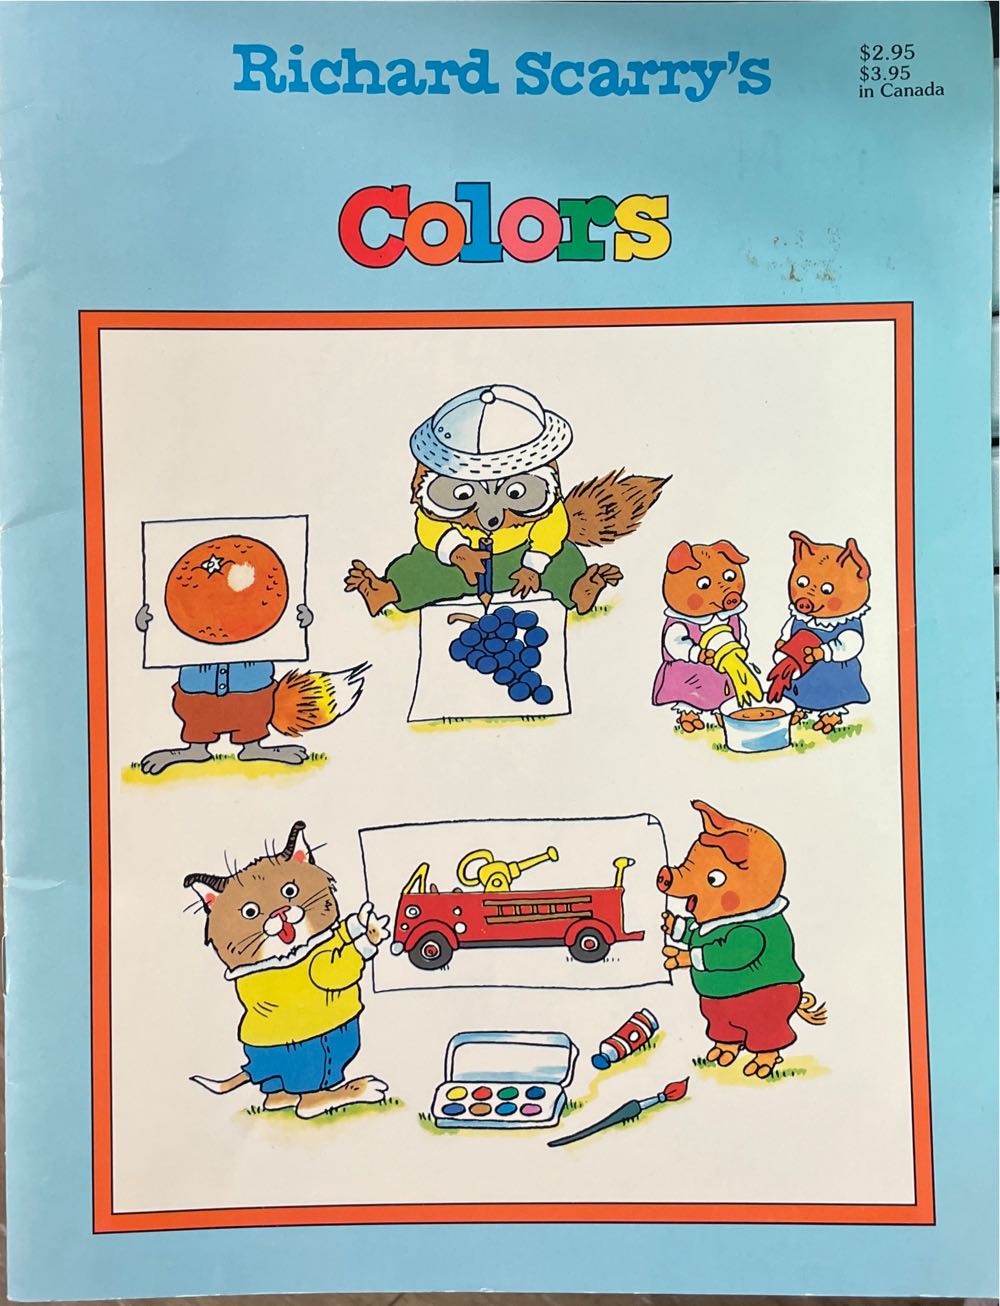 Colors - Richard Scarry book collectible [Barcode 9781561448029] - Main Image 1